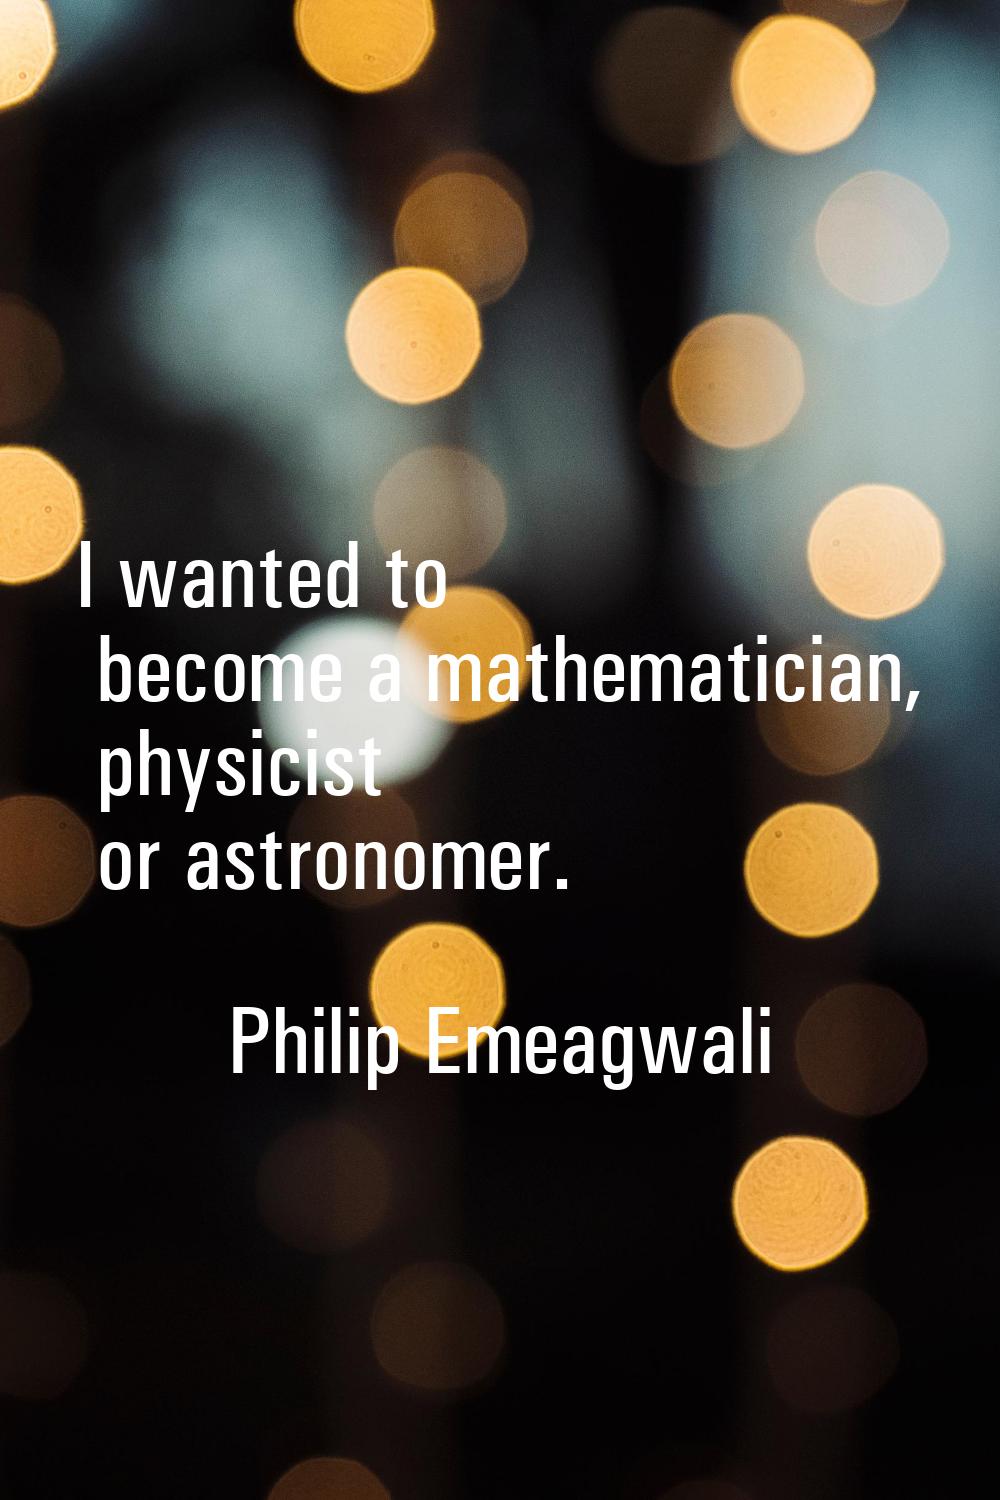 I wanted to become a mathematician, physicist or astronomer.